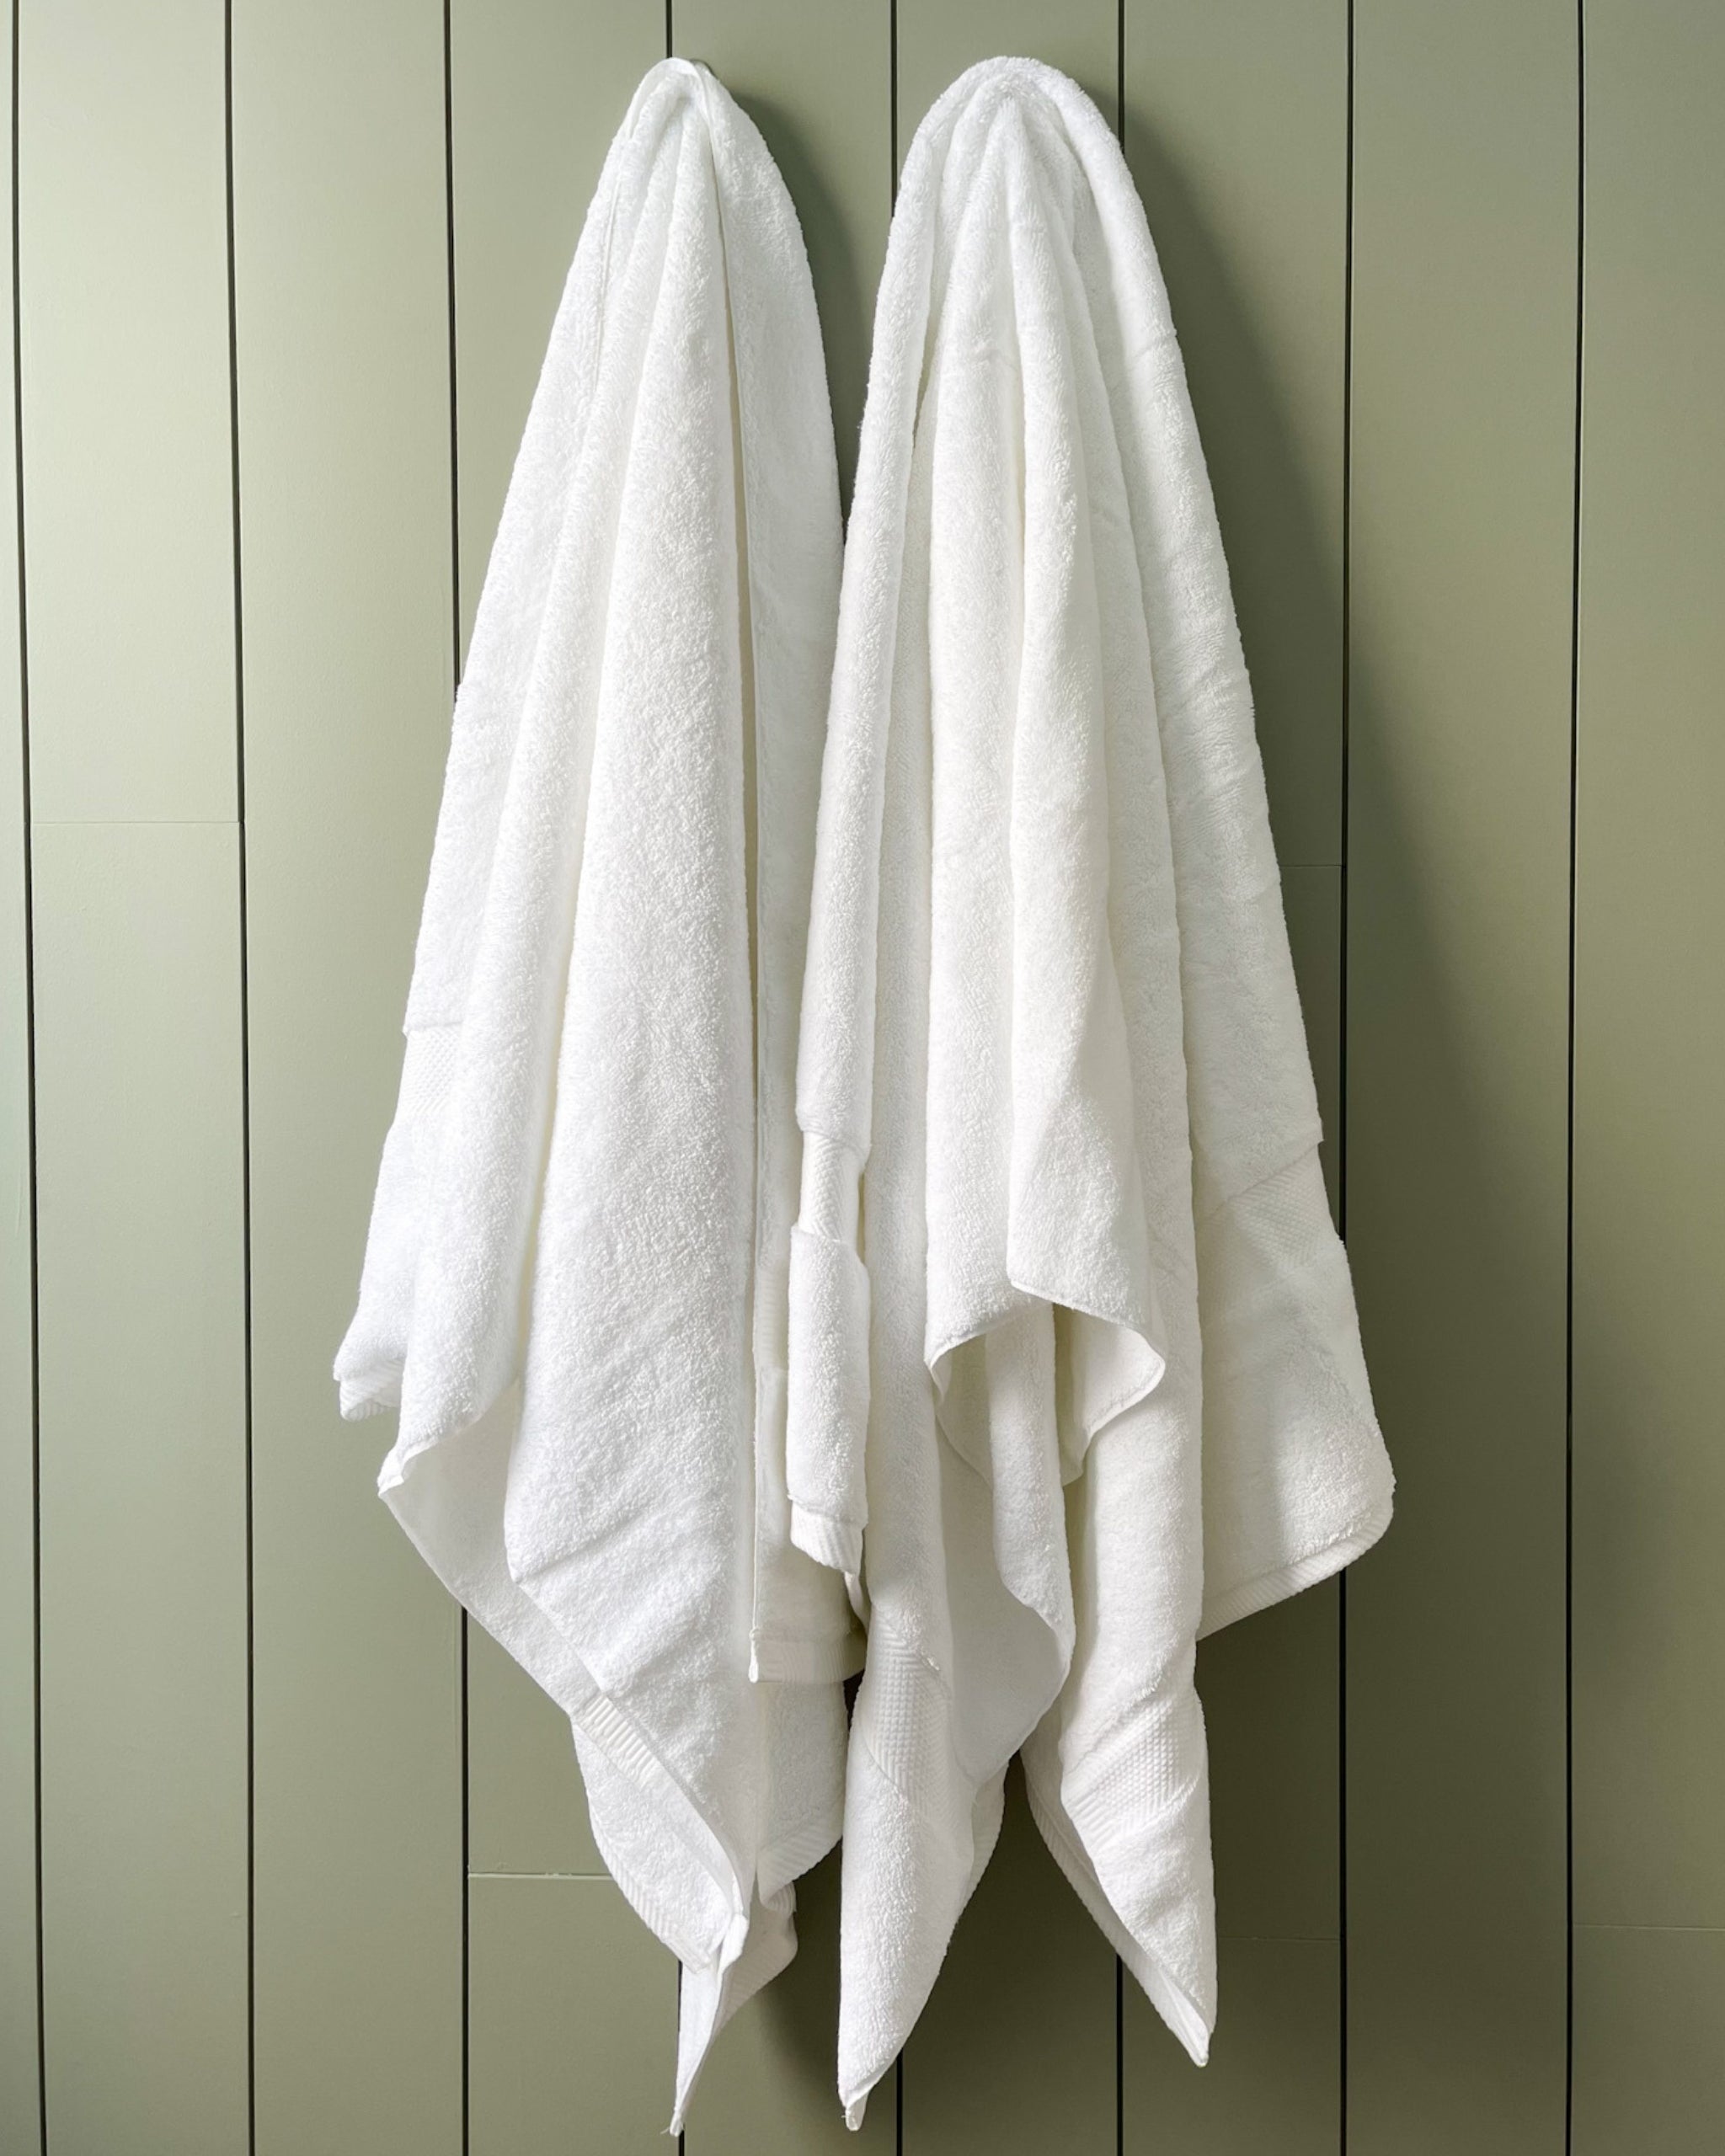 Two white fluffy towels hanging from towel racks.